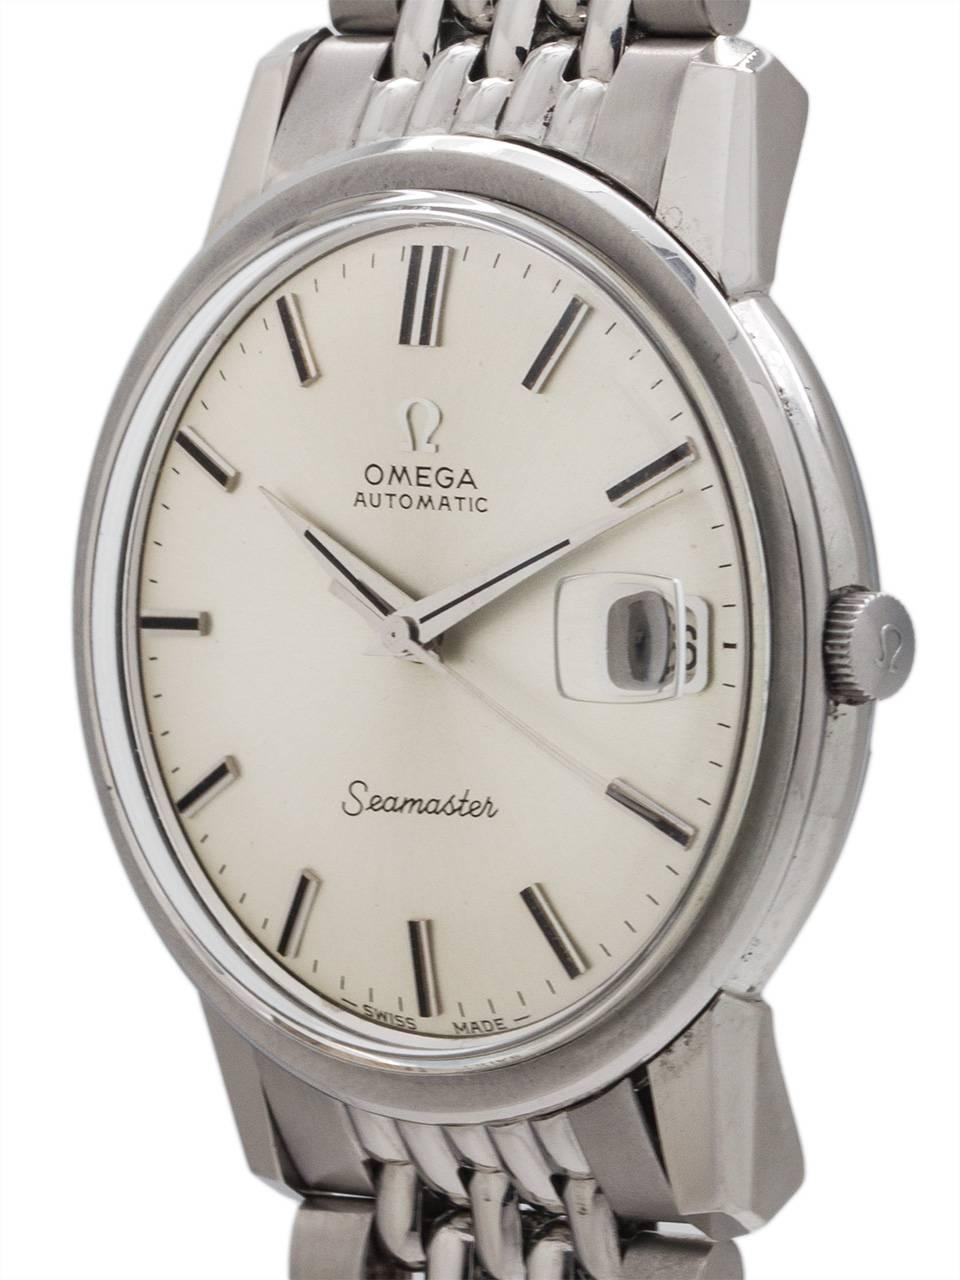 Vintage Omega Seamaster automatic circa 1967. Featuring 35 X 42mm case with screw down case back with deeply embossed seamonster logo, acrylic crystal, and with super minty condition original silvered satin dial with applied silver indexes and